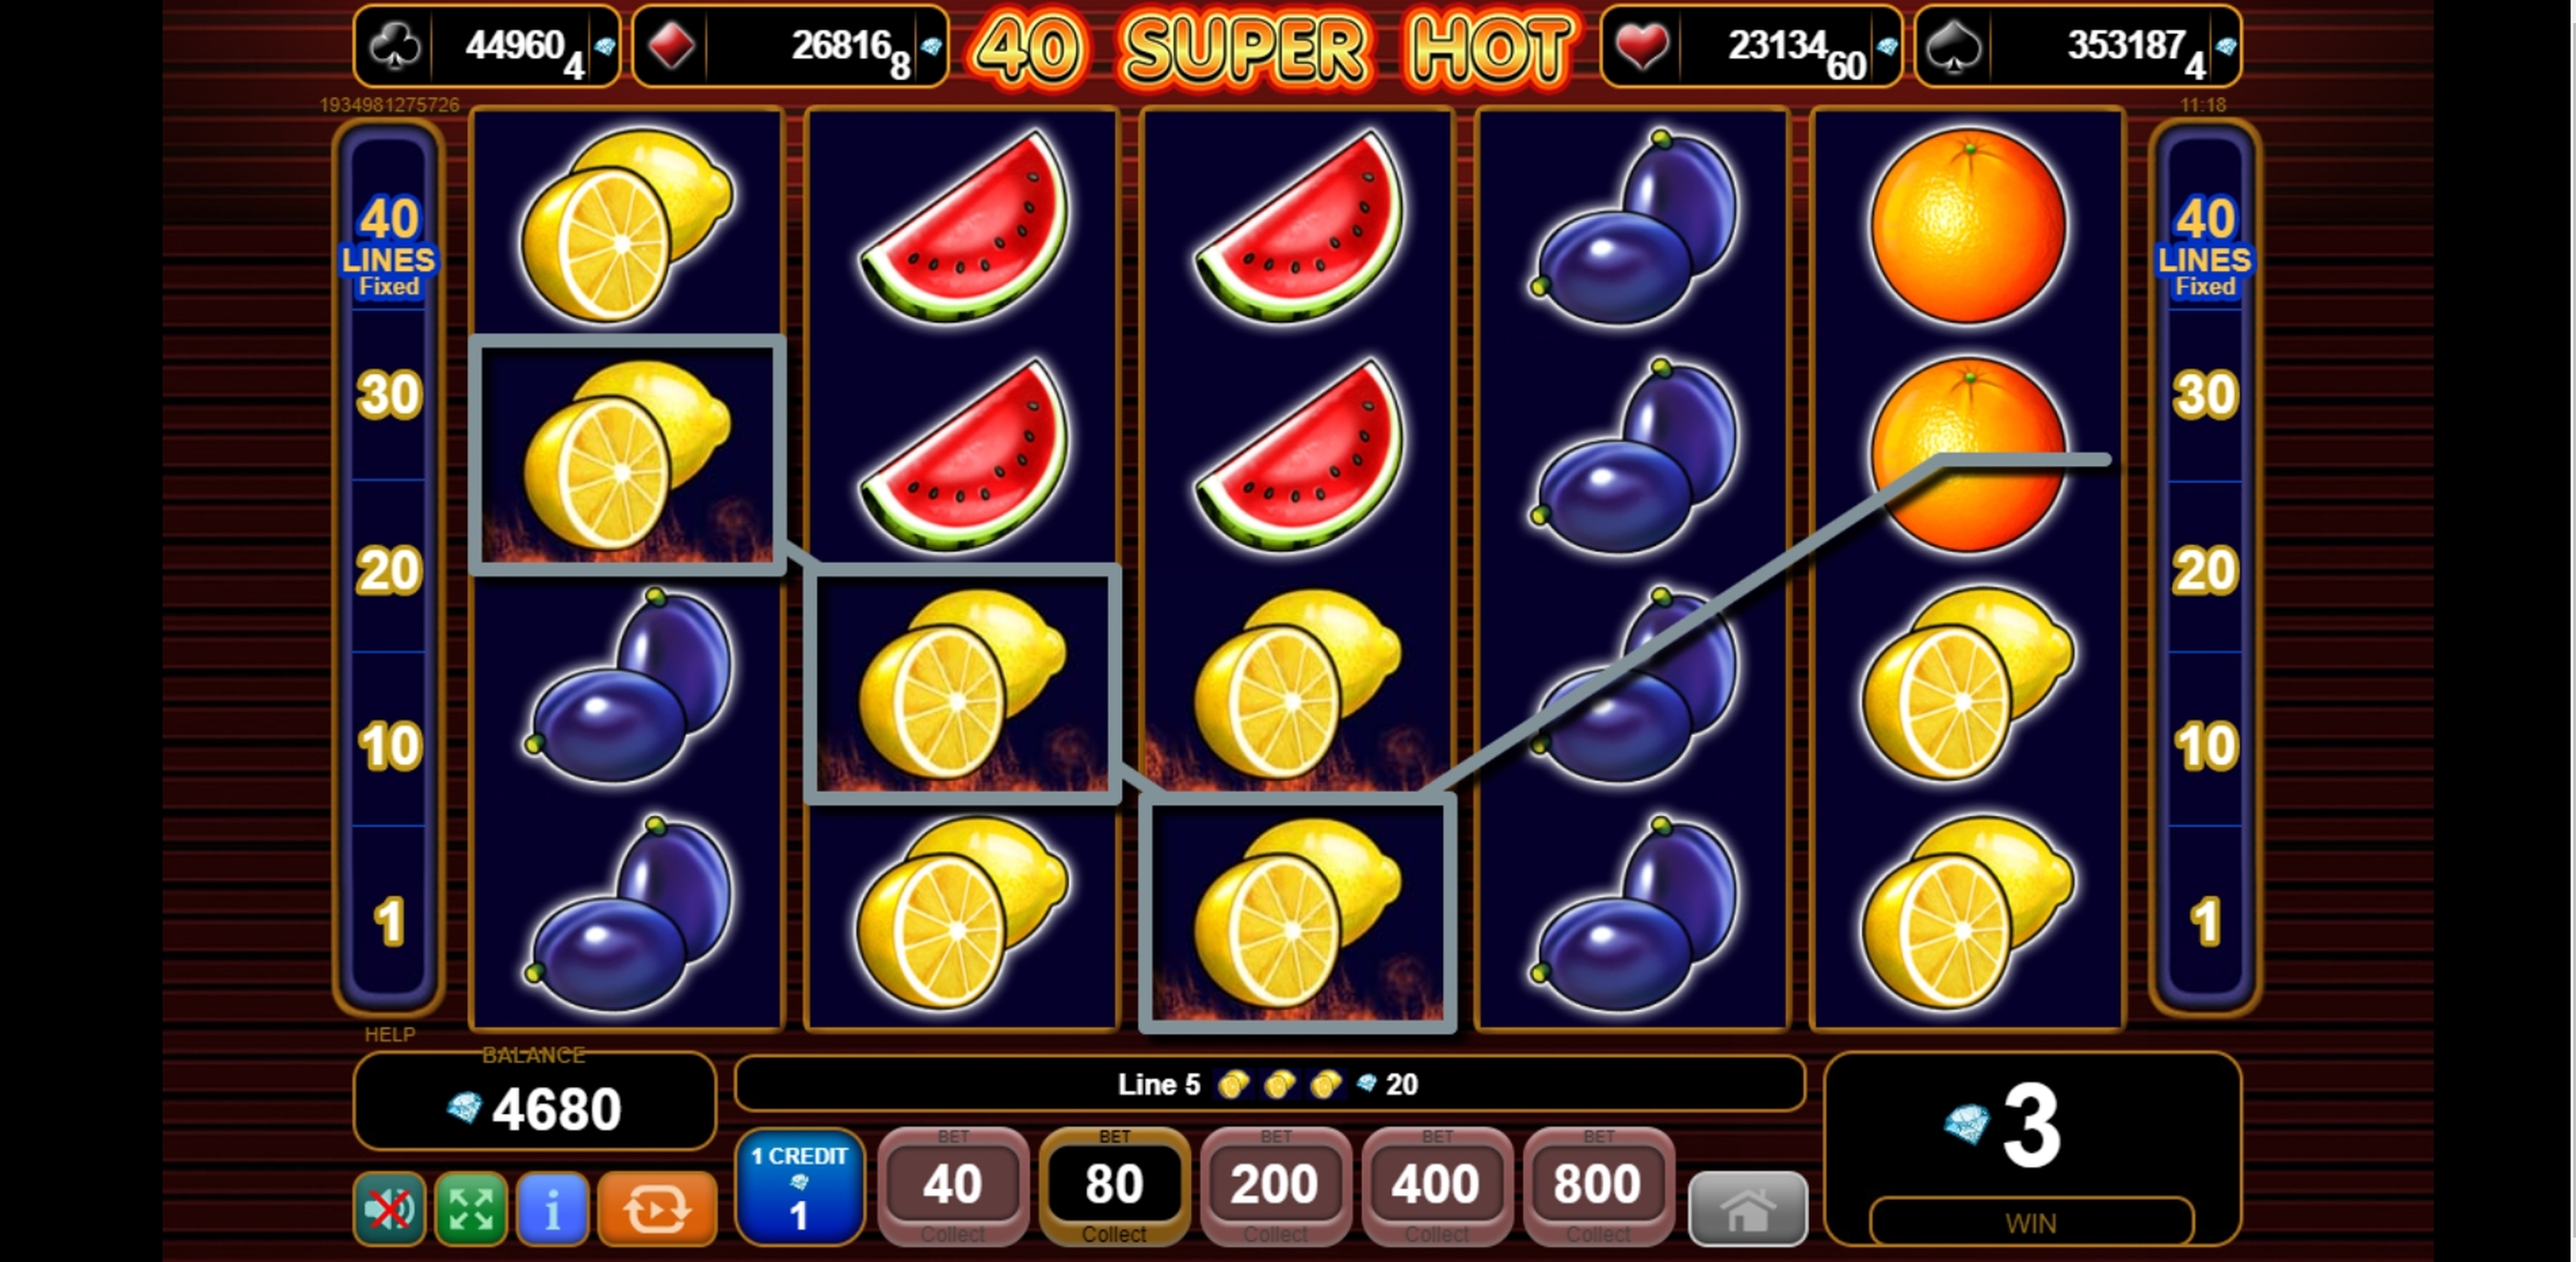 Win Money in 40 Super Hot Free Slot Game by EGT